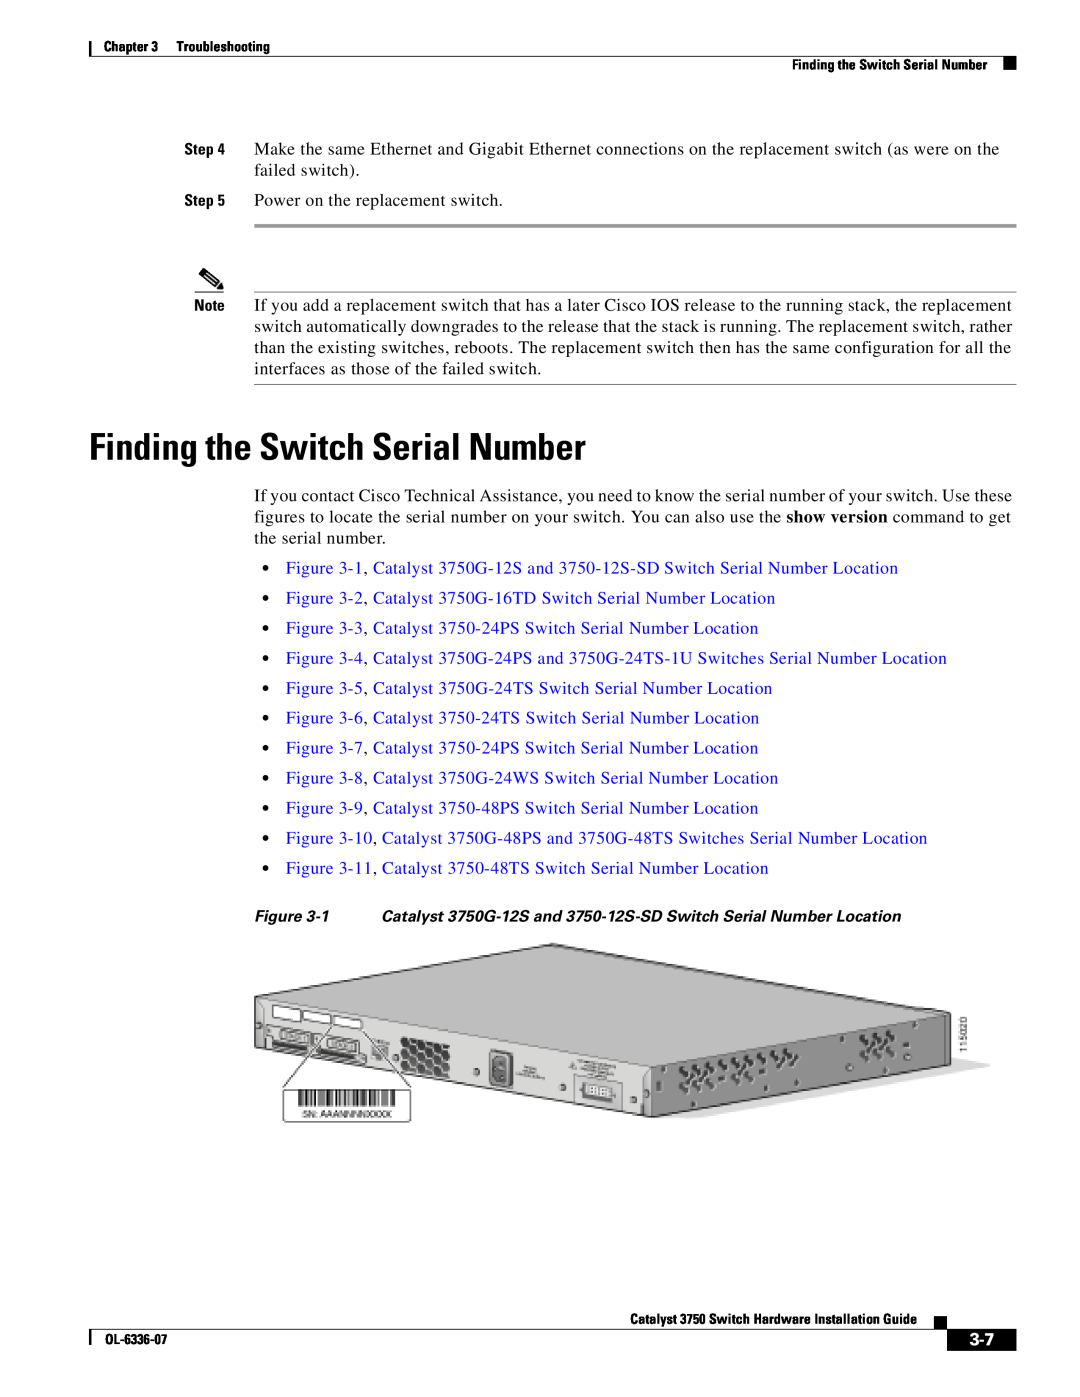 Cisco Systems WSC3750X24TS Finding the Switch Serial Number, 2, Catalyst 3750G-16TD Switch Serial Number Location 